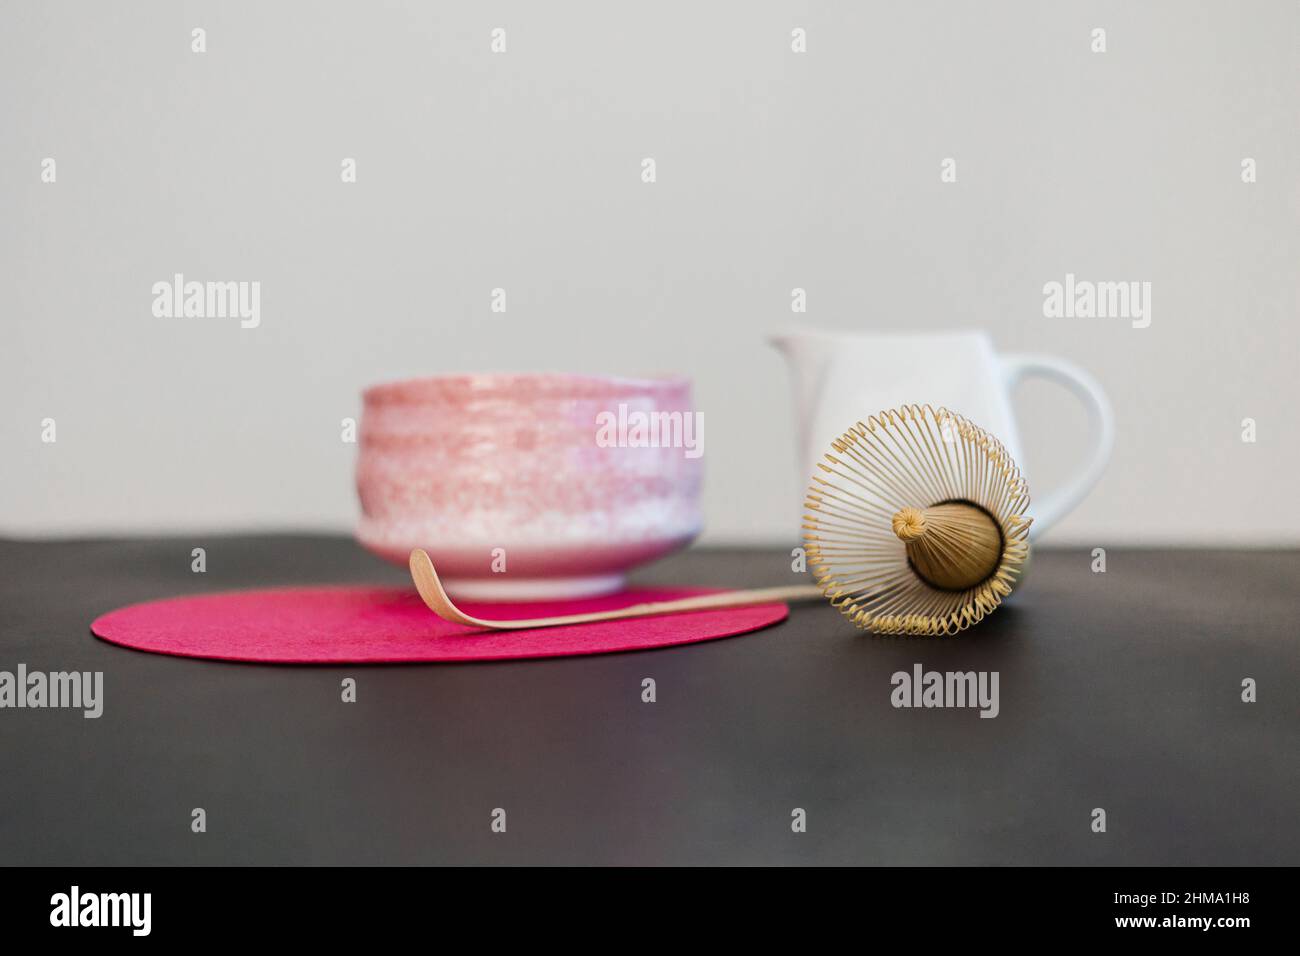 Ceramic bowl and wooden chasen and chashaku on pink round stand on black table at sunlight Stock Photo